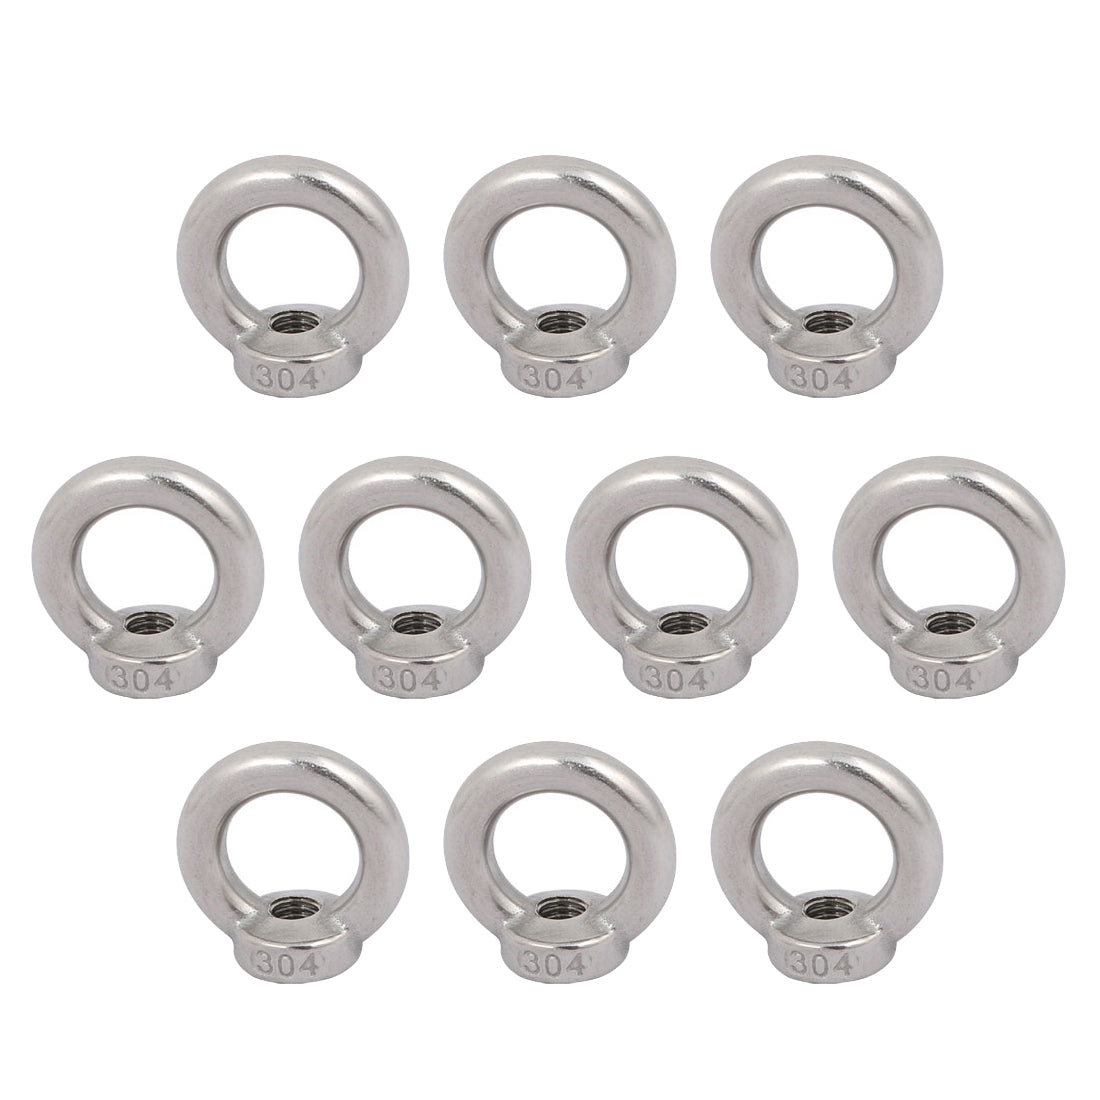 uxcell Uxcell M8 Female Thread 304 Stainless Steel Ring Shaped Lifting Eye Nut 10pcs